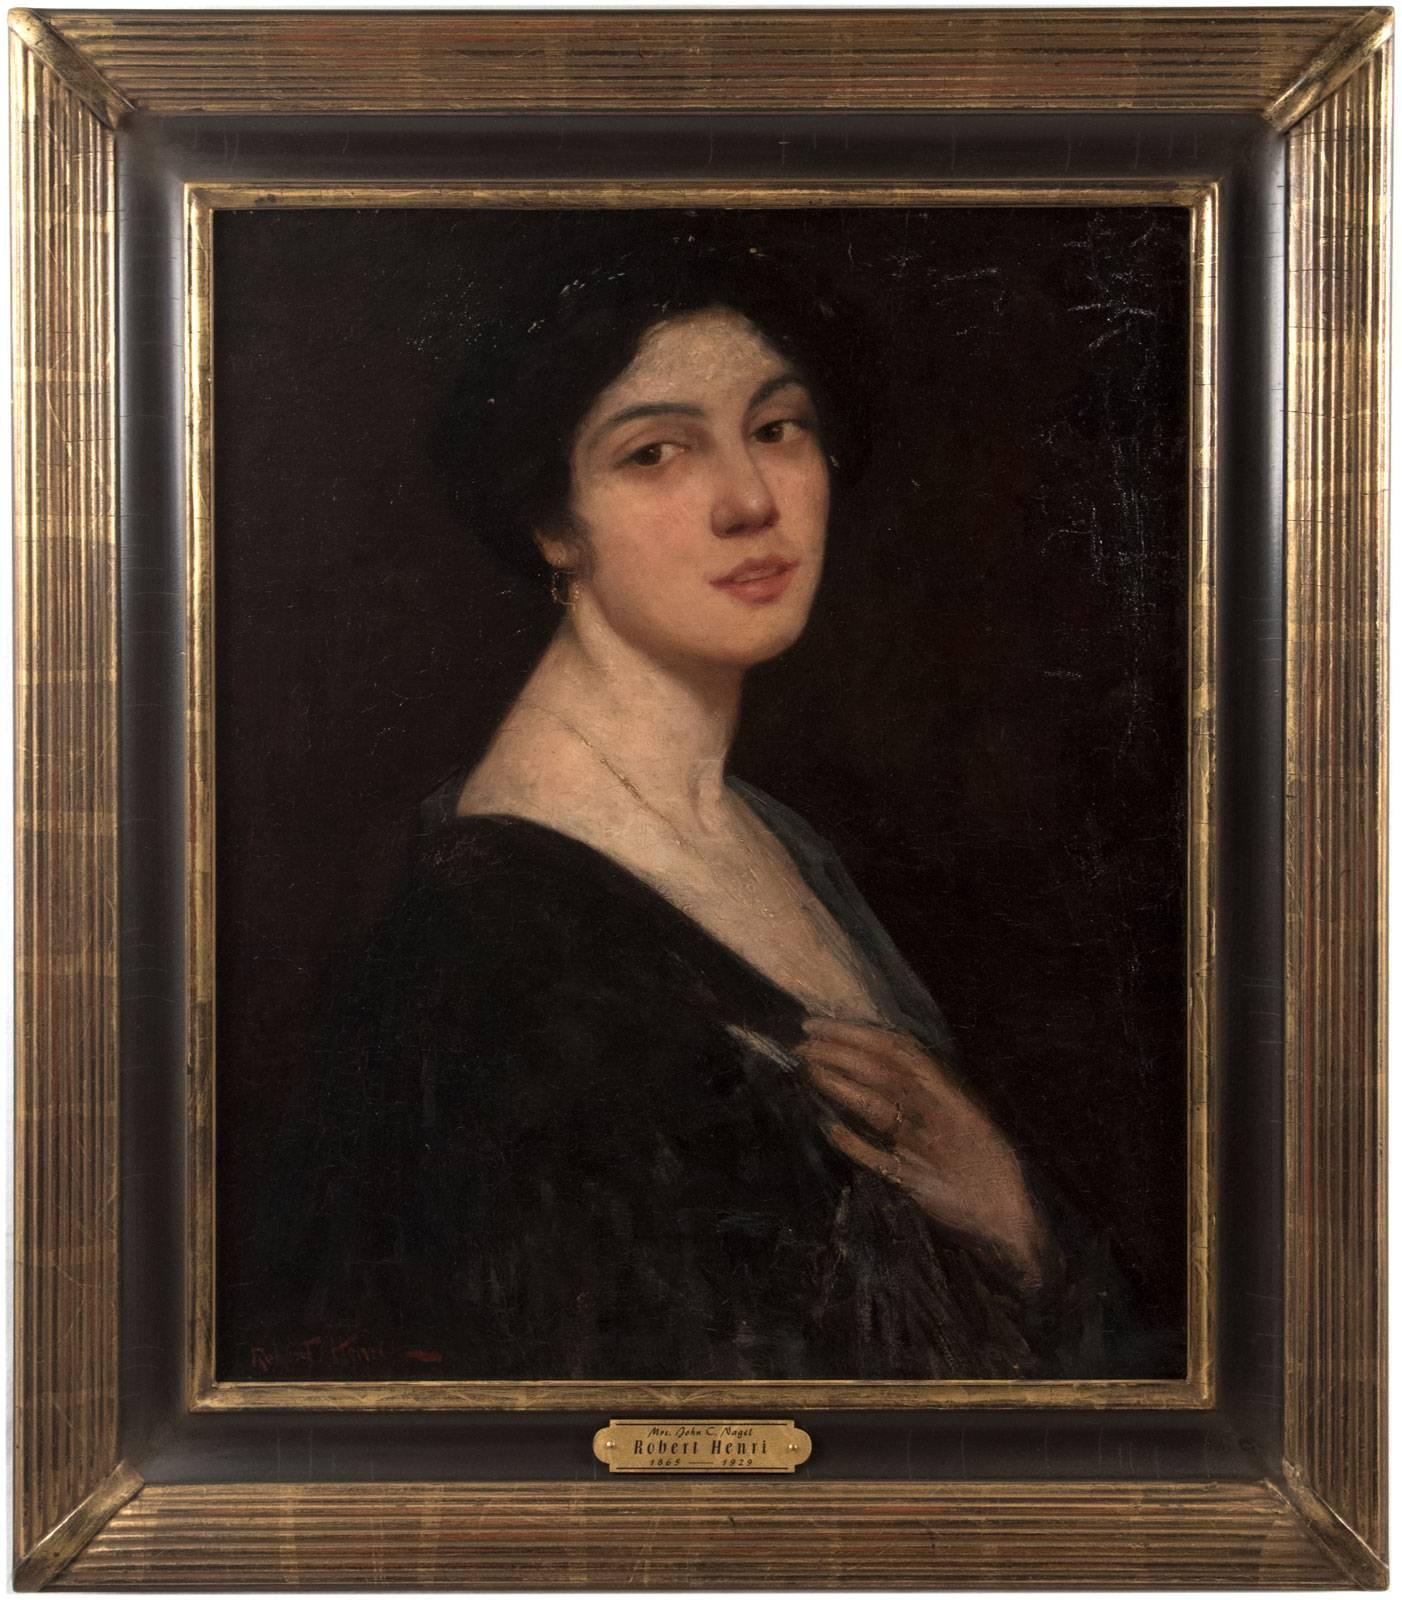 In this early 20th century portrait, by American artist Robert (Cozad) Henri (1865-1929), a woman emerges from a dark background and looks out over her right shoulder toward the viewer, her hand holding her garment closed at her breast as though